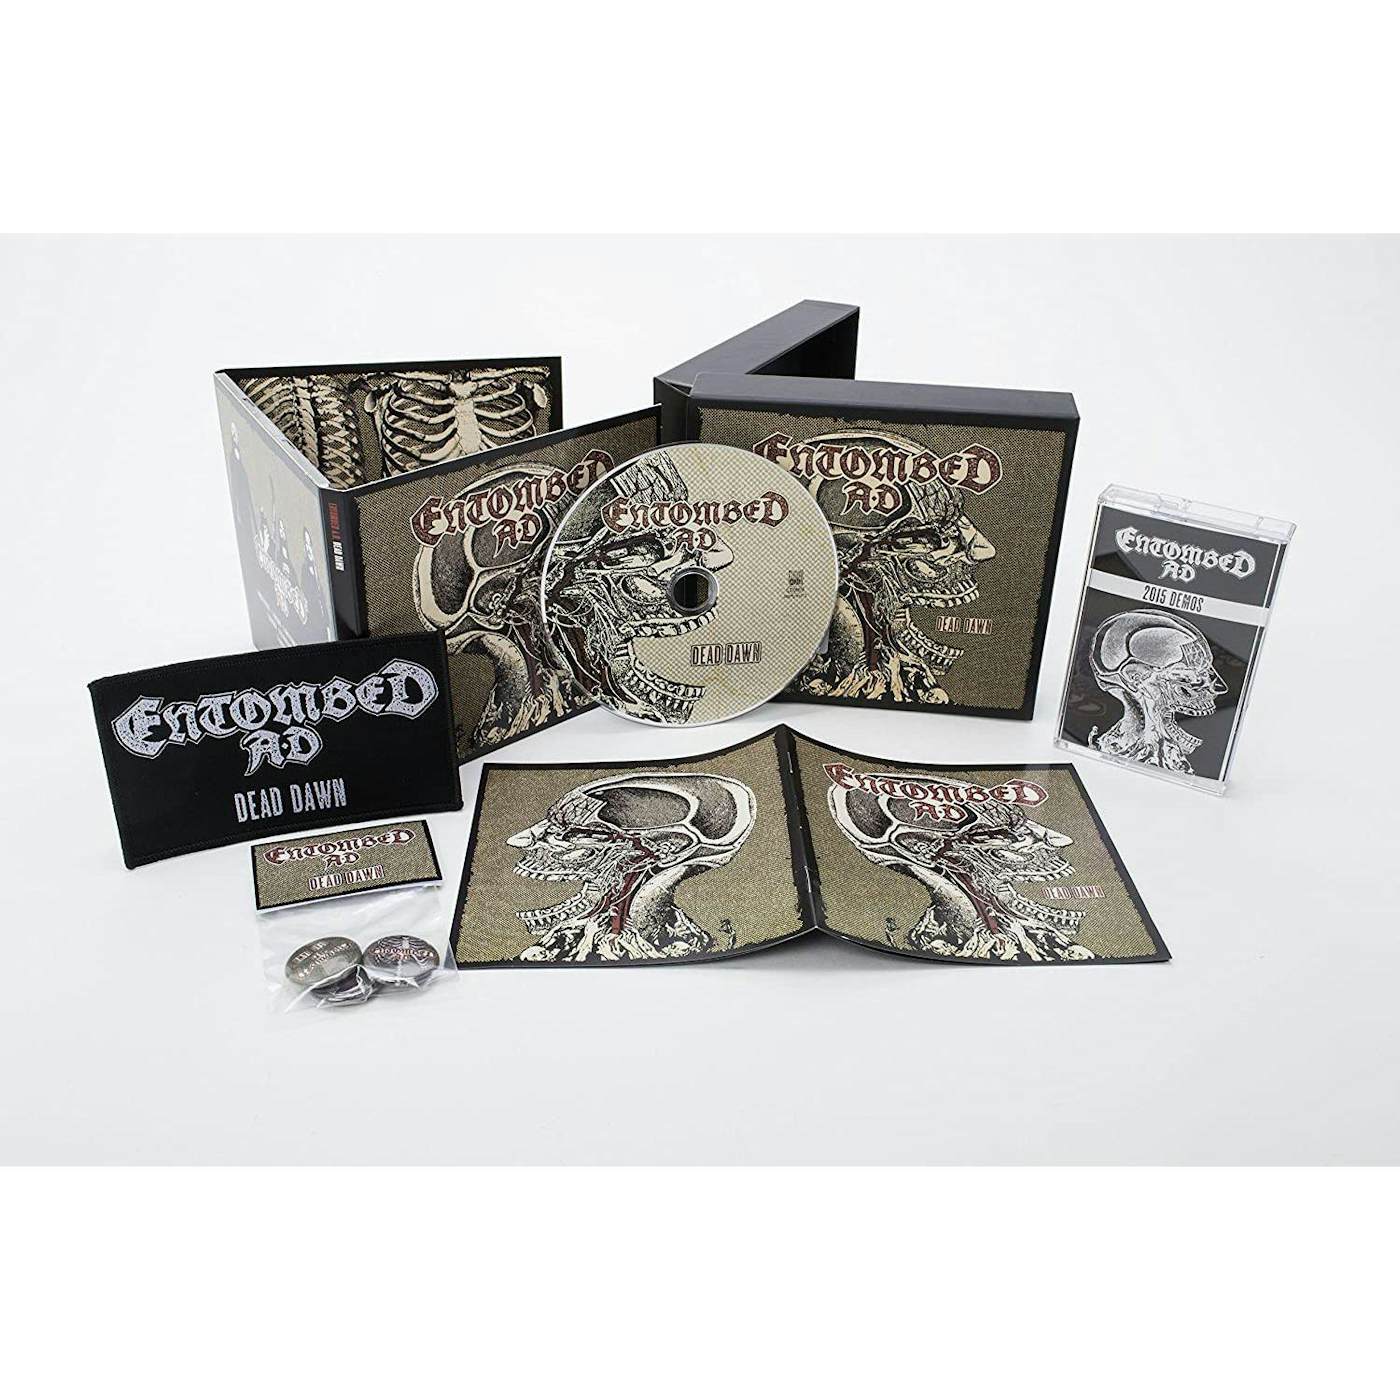 Entombed Dead Dawn: Deluxe Edition (CD/Cassette) Box Set